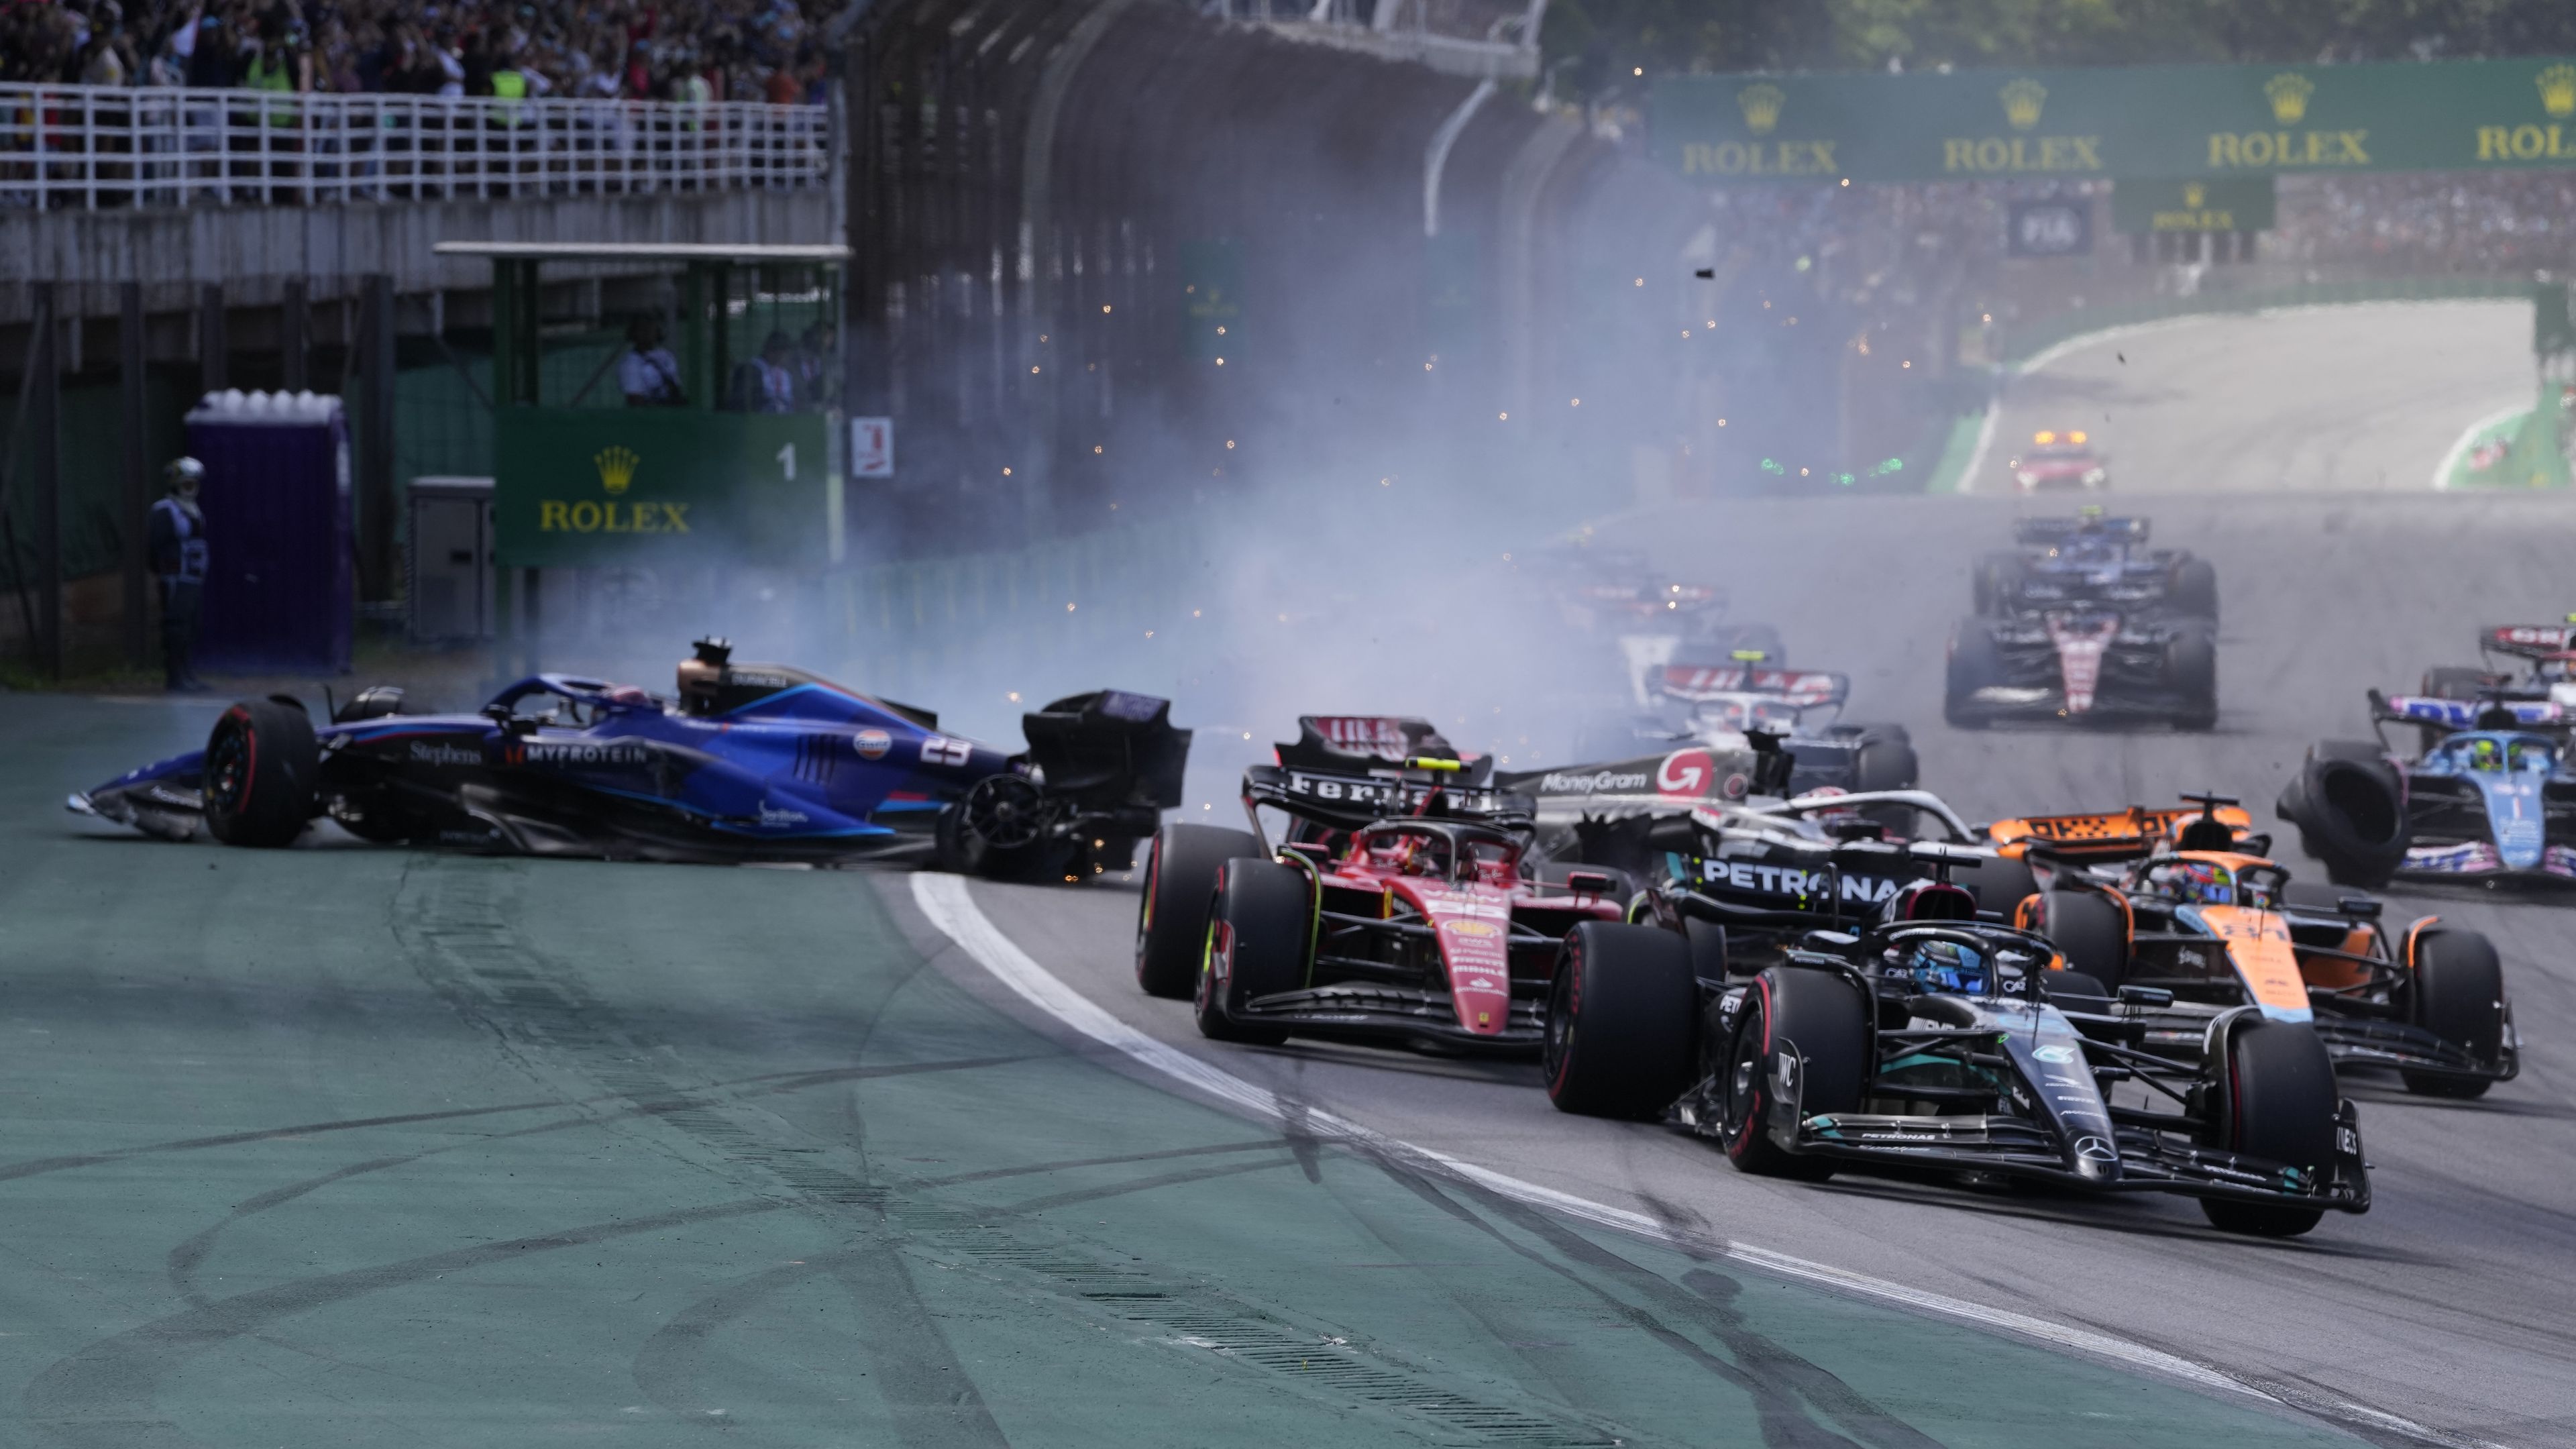 'Oscar, kill the engine': Aussie caught up in wild first-lap chaos at Brazil Grand Prix